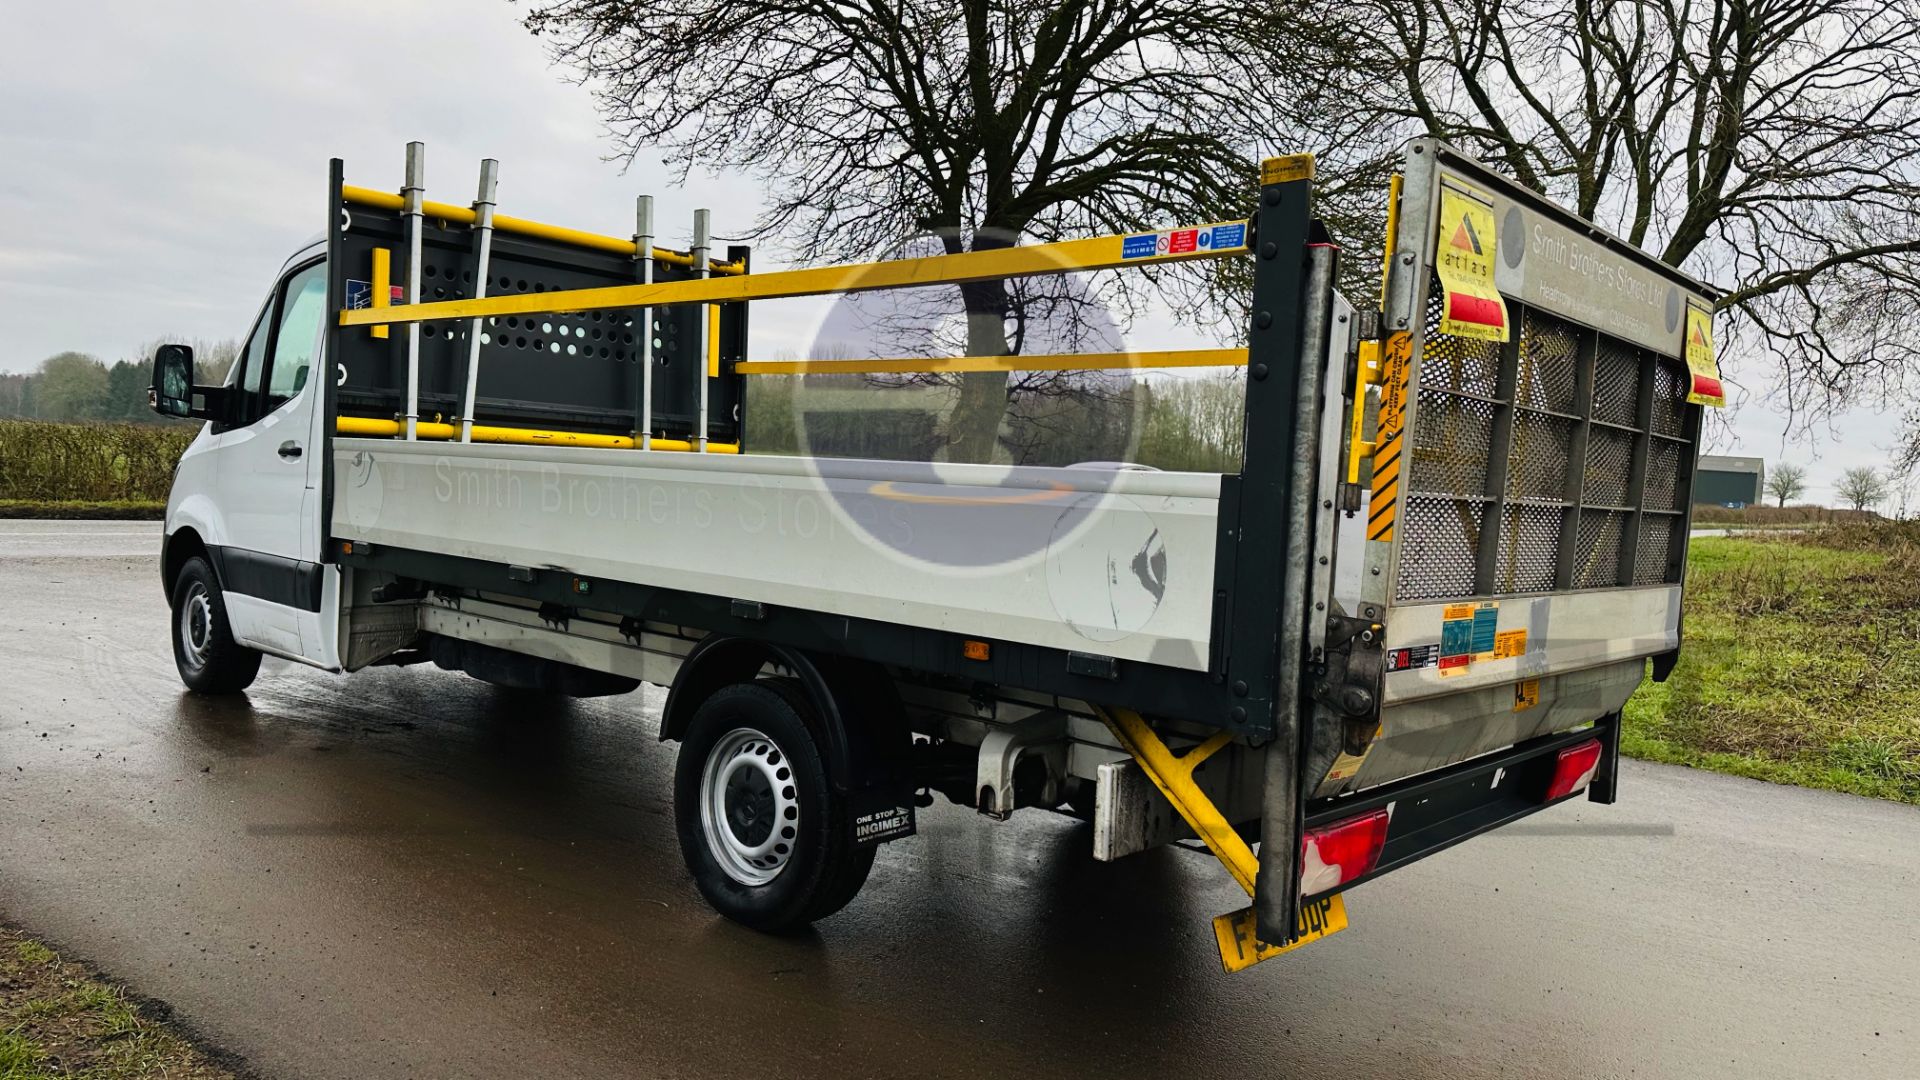 MERCEDES-BENZ SPRINTER 314 CDI *LWB - DROPSIDE* (2019 - EURO 6) AUTOMATIC *TAIL-LIFT* (3500 KG) - Image 10 of 40